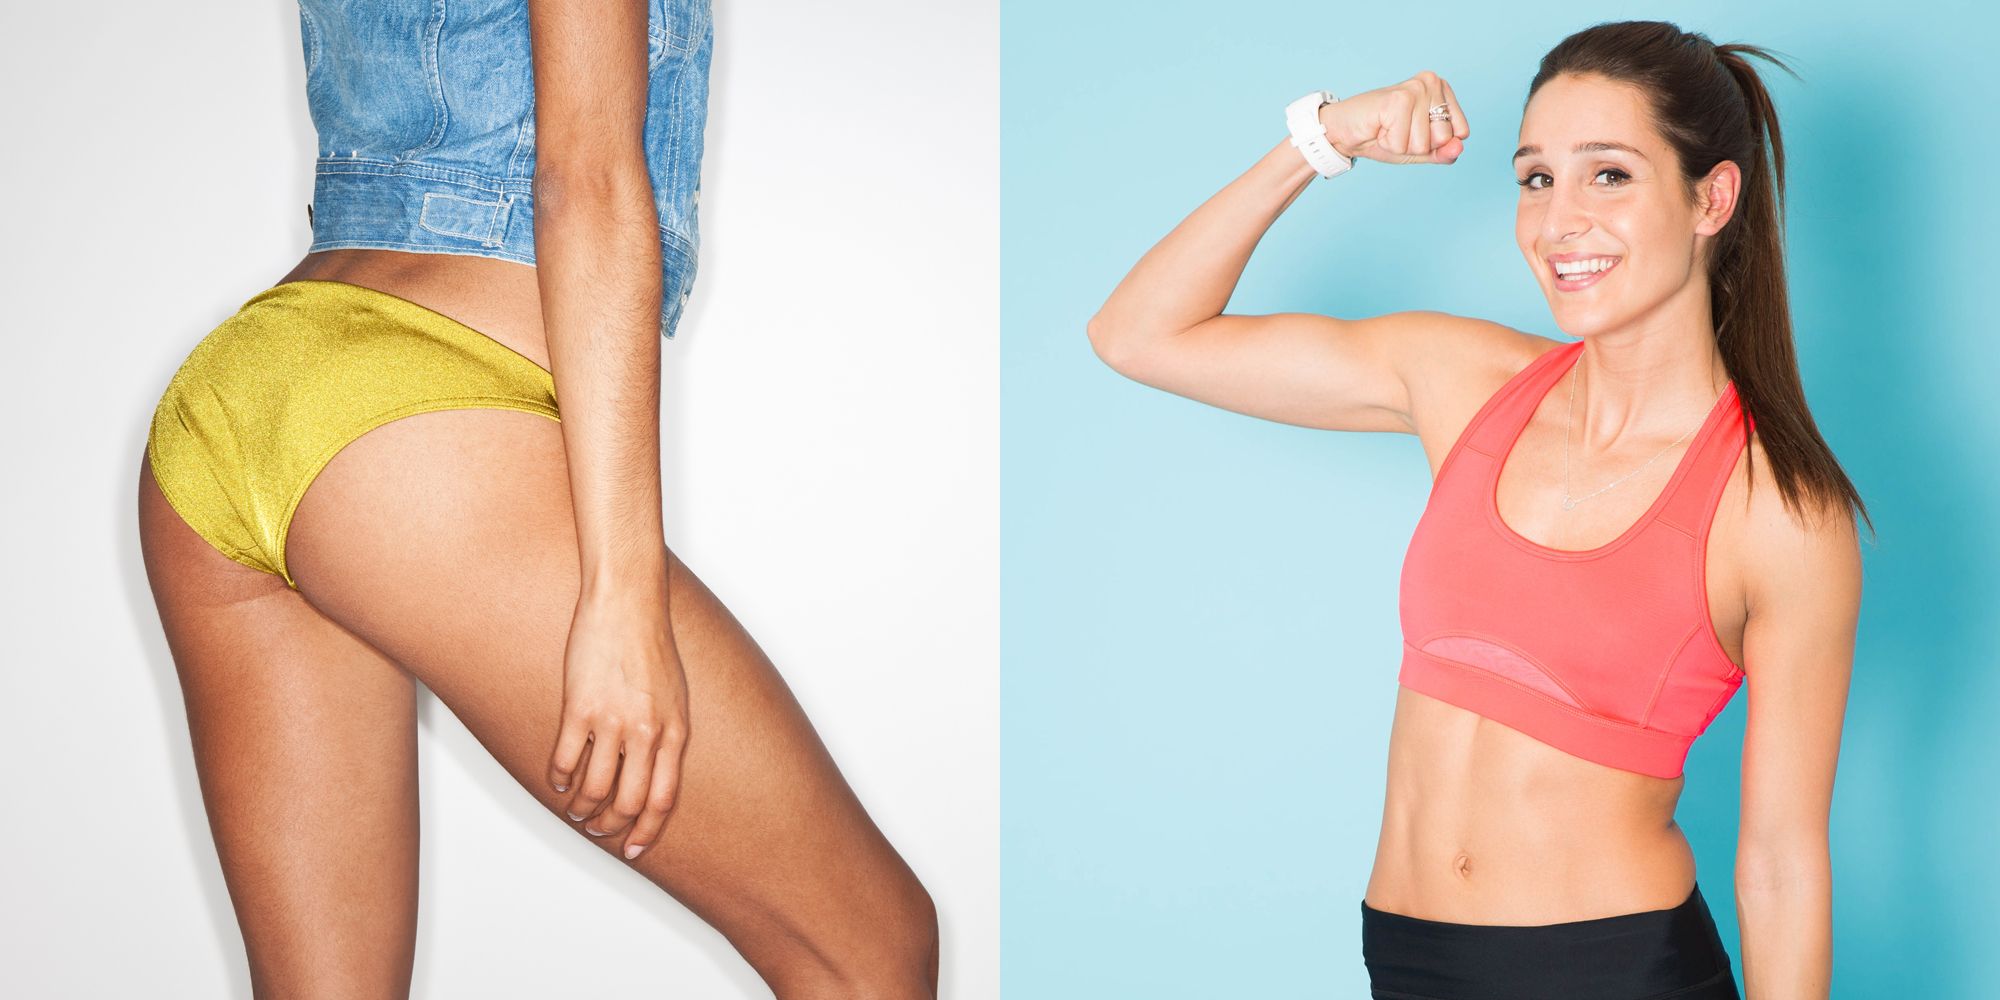 Kayla Itsines' BBG workouts transformed my body — here's how they work